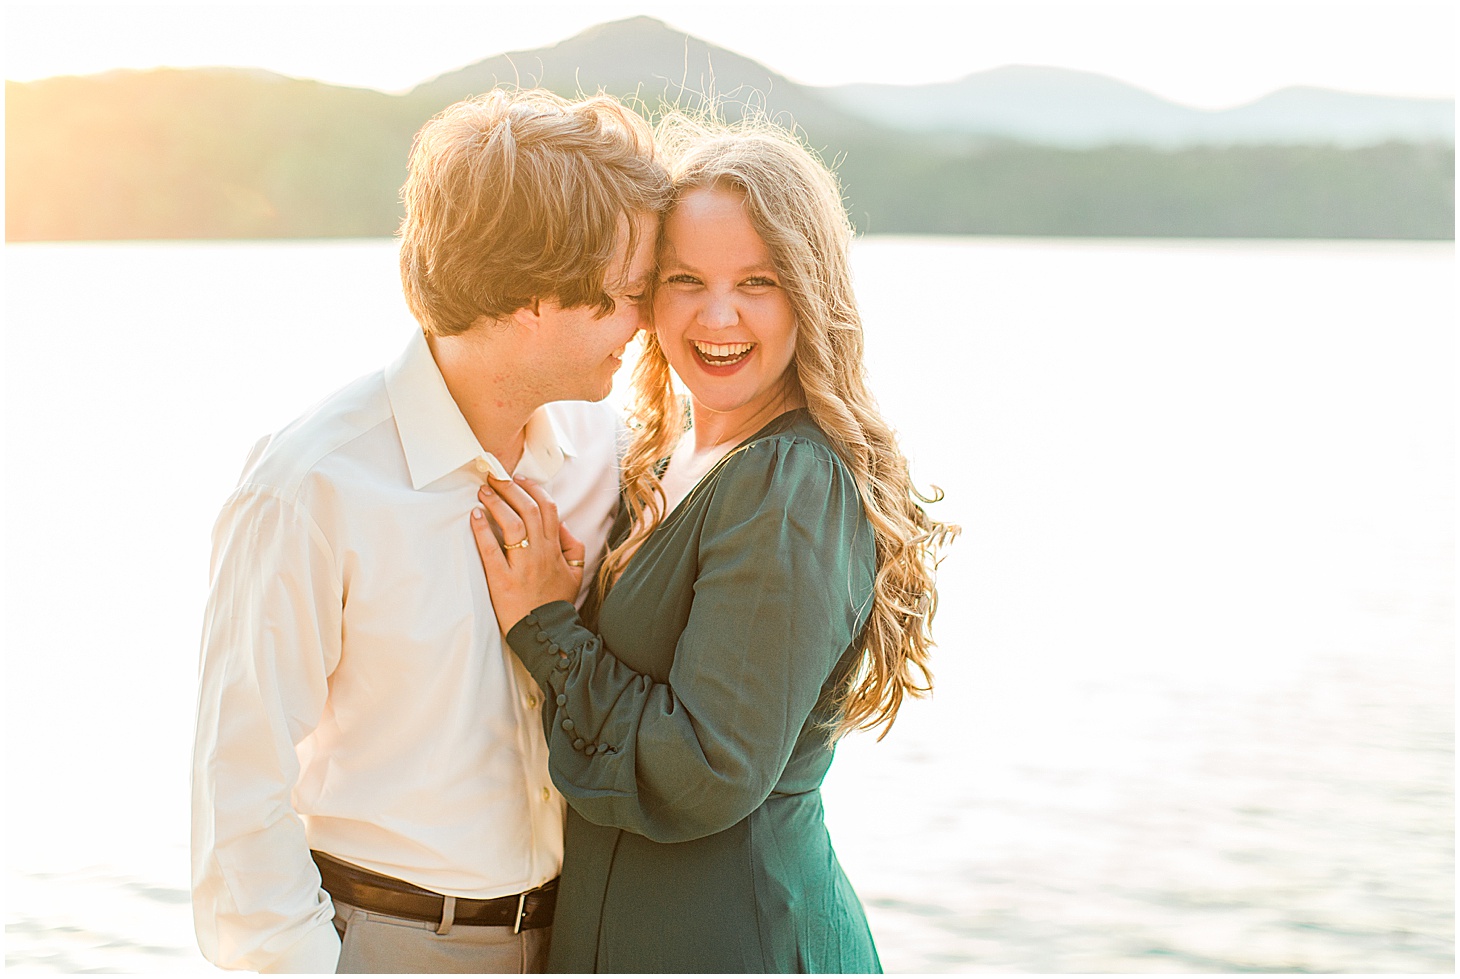 carvinscoveengagementsession_roanokeengagementsession_carvinscove_virginiawedding_virginiaweddingphotographer_vaweddingphotographer_photo_0053.jpg